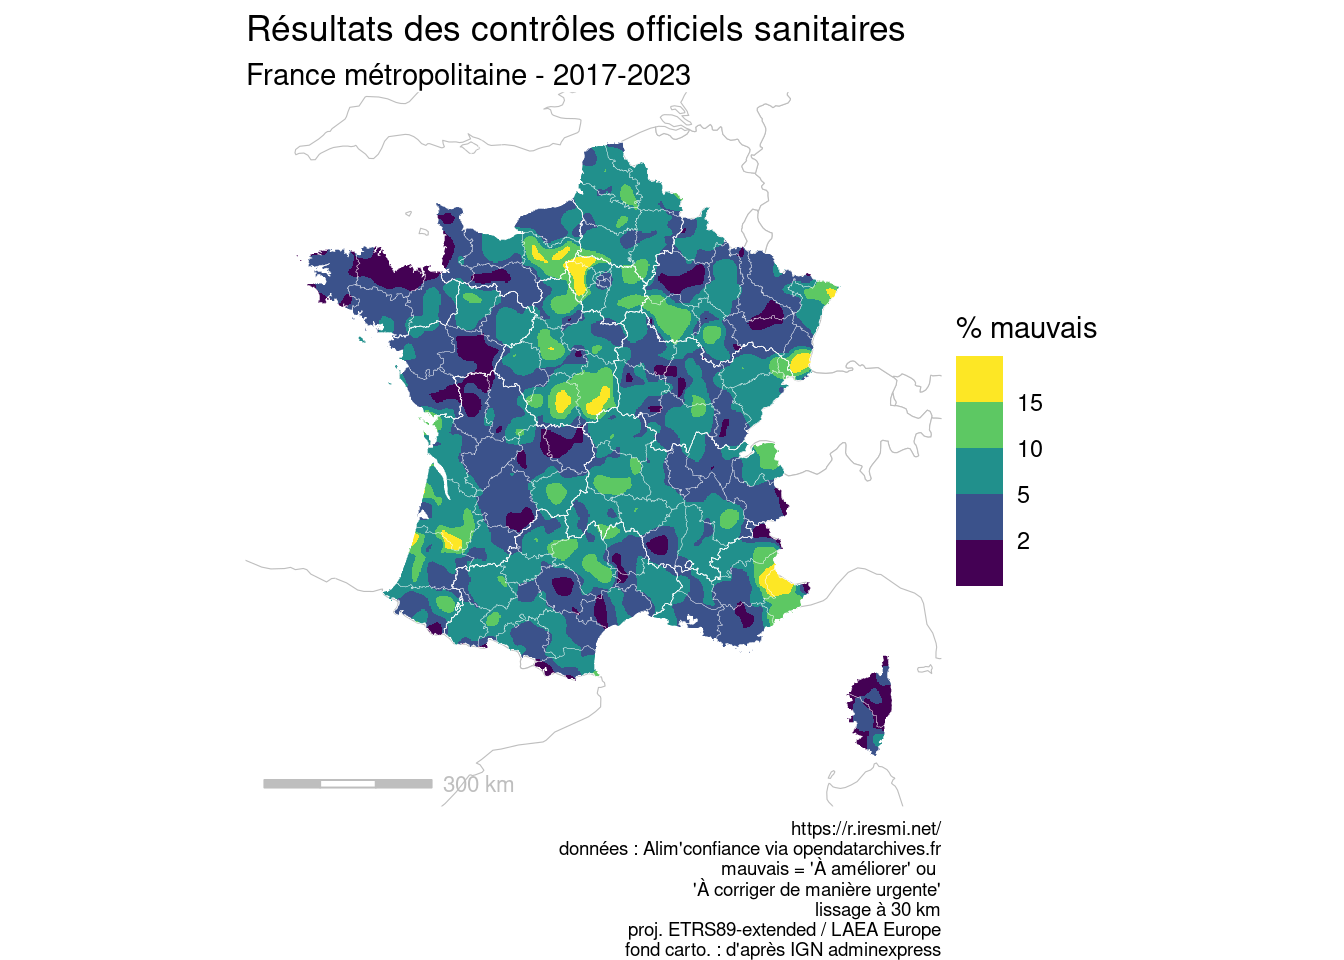 A map of bad controls in France (with kernel smoothing)